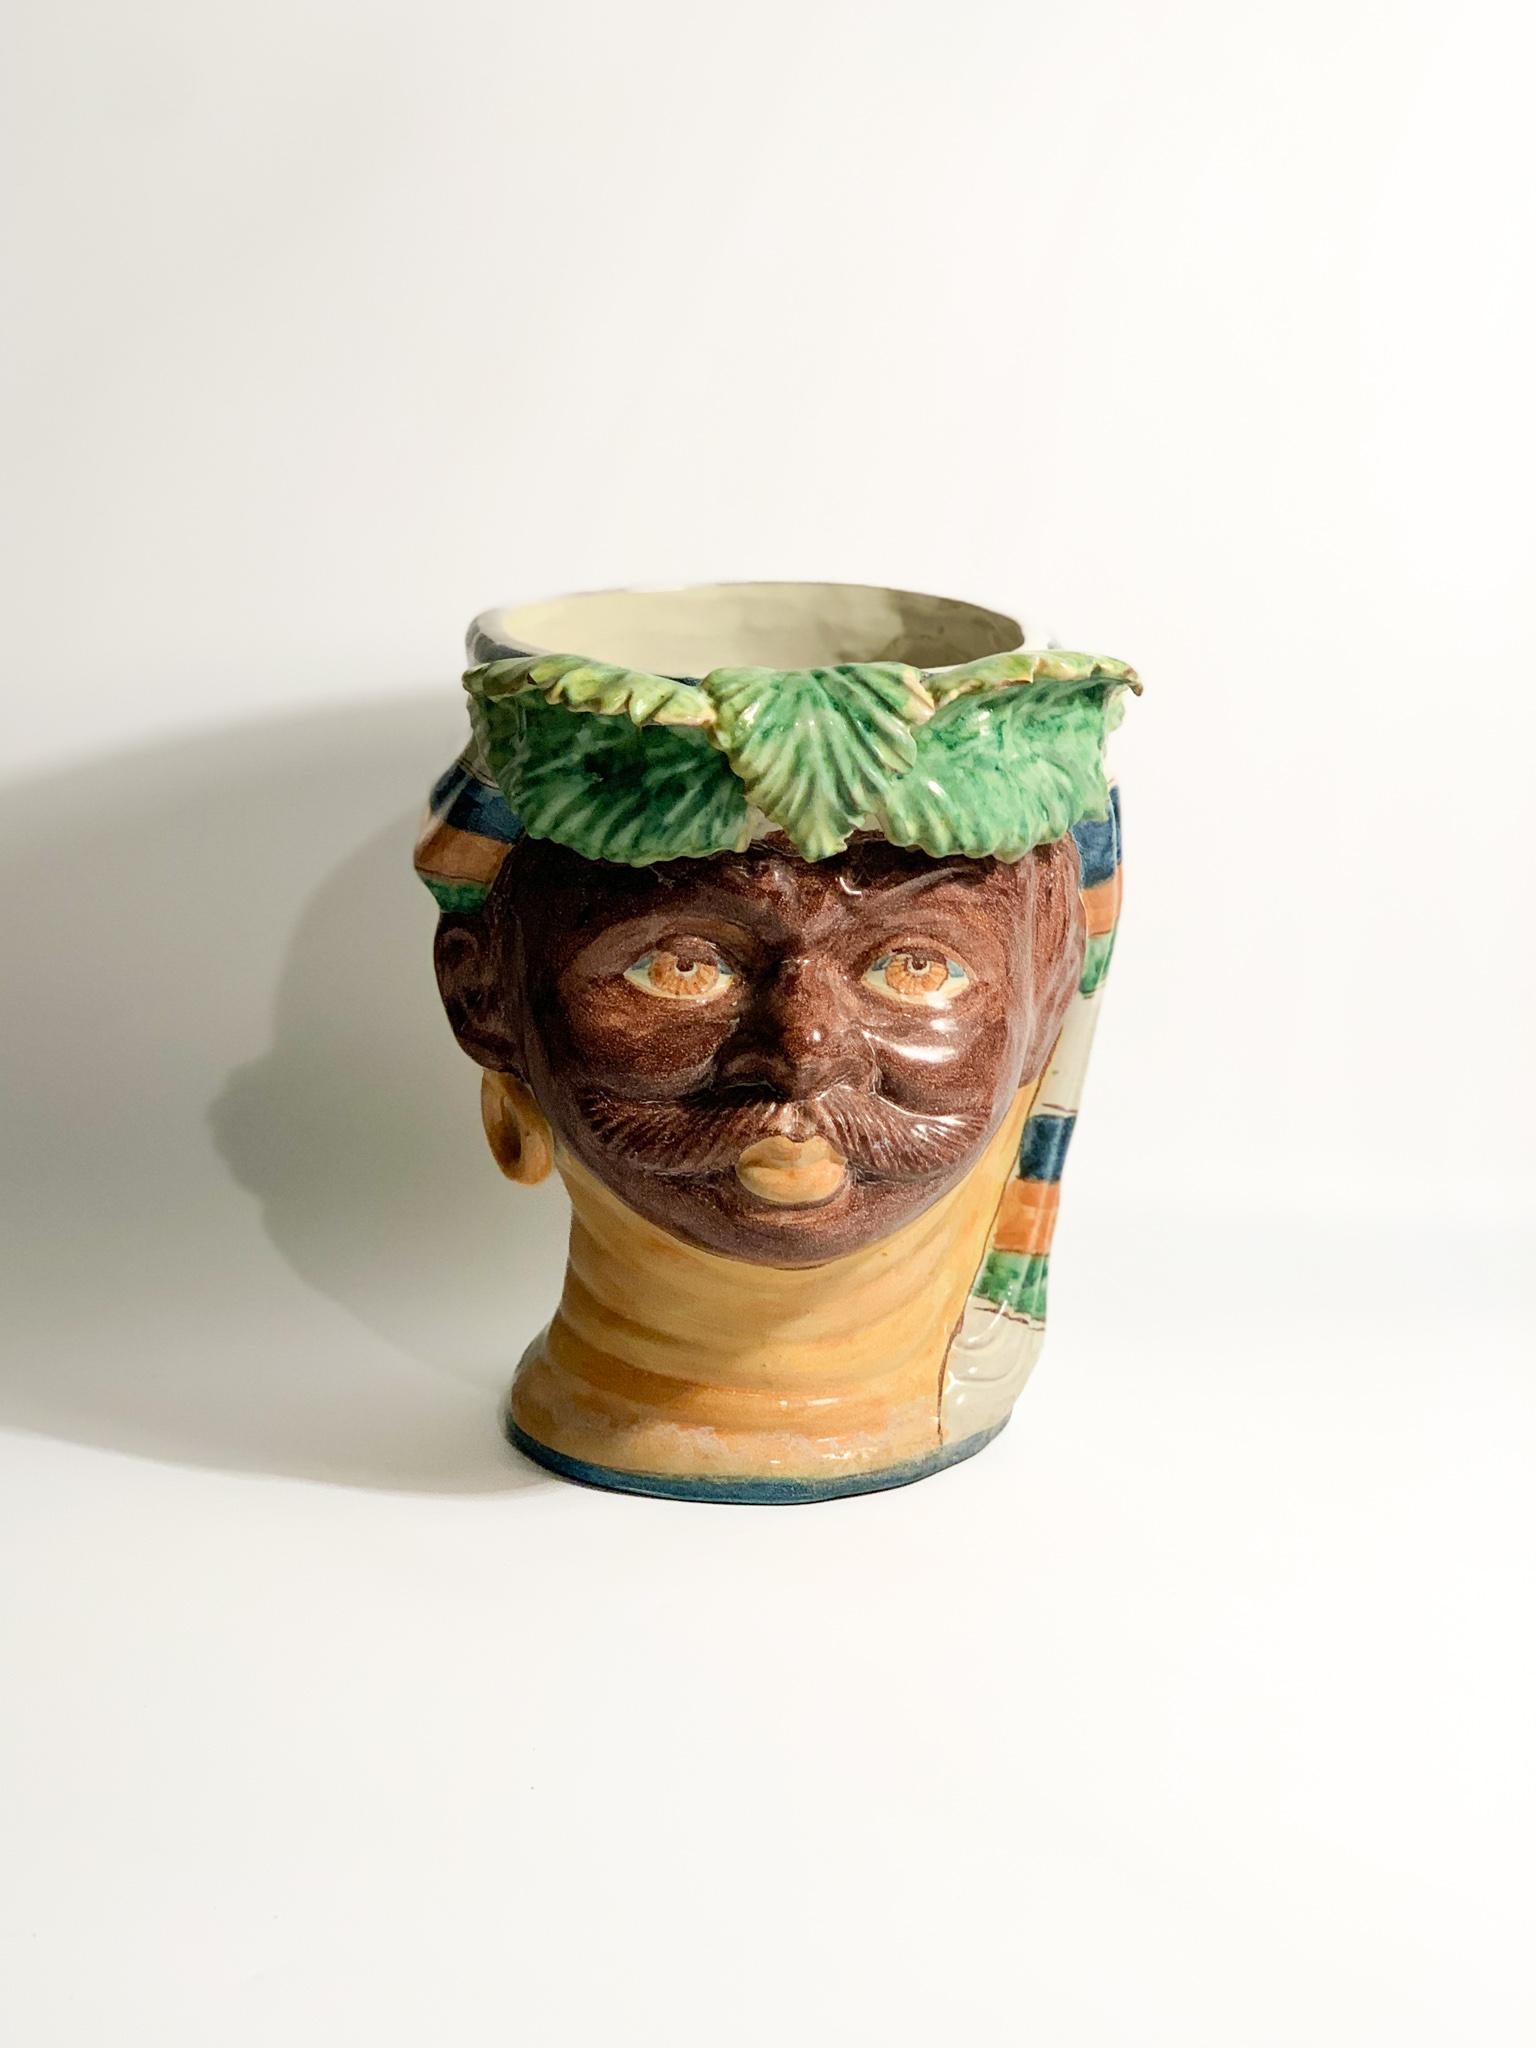 Moor's head in Caltagirone ceramic of a male figure, created by Giacomo Alessi in the 1990s

Ø cm 20 h cm 29

Giacomo Alessi is an Italian master ceramist born in Caltagirone, Sicily, in 1957. He is one of the few registered Sicilian masters in the